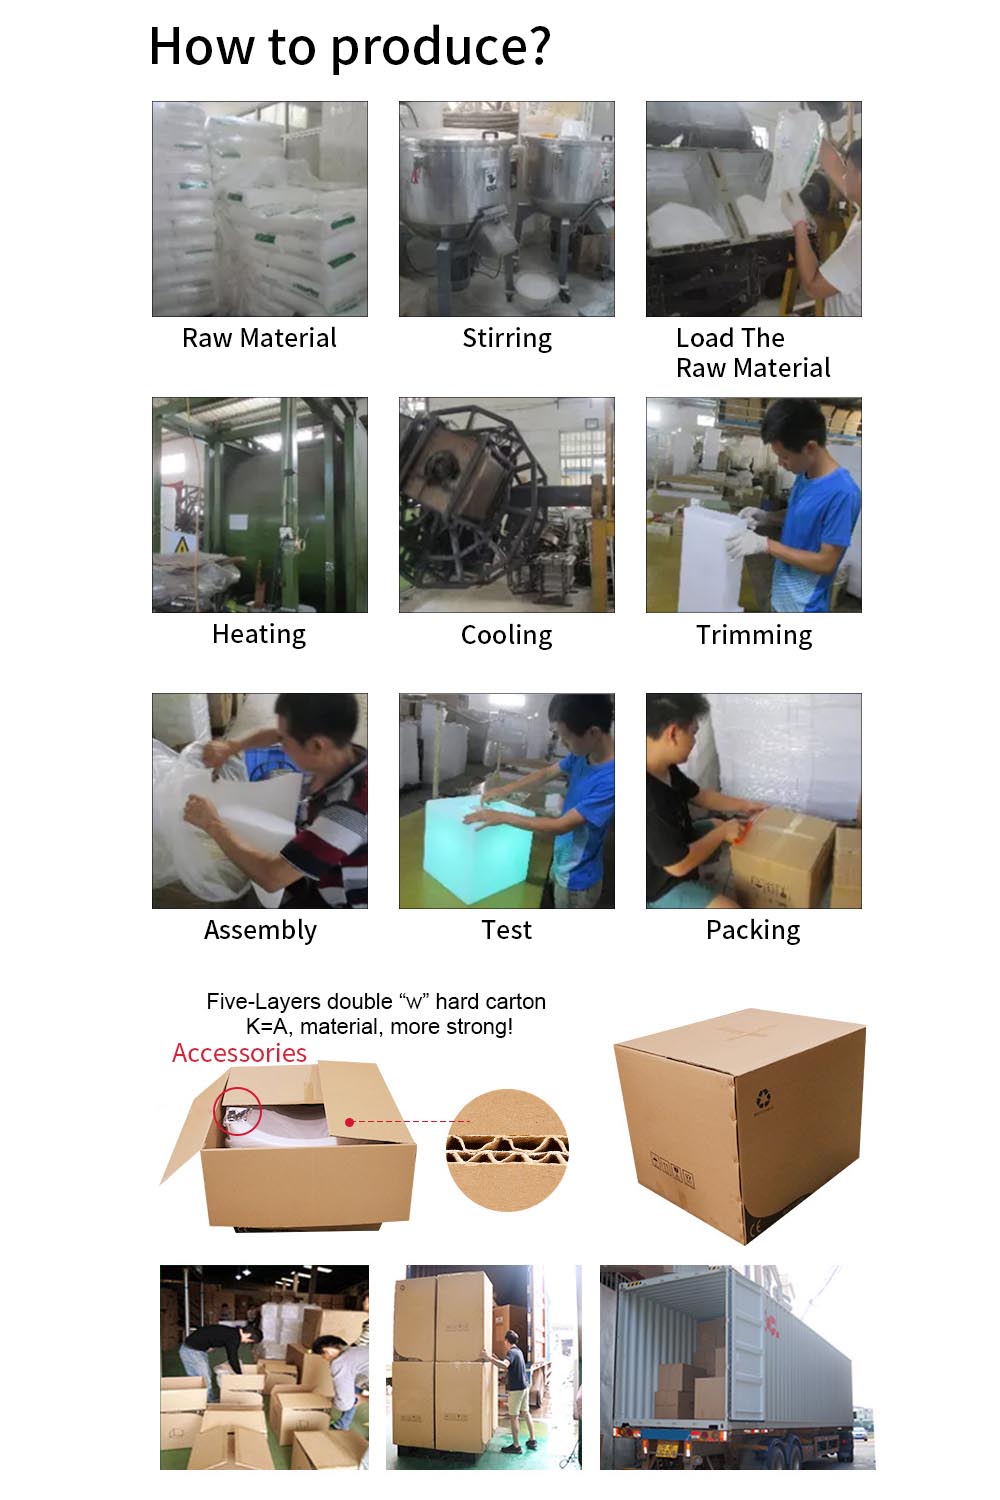 Production and packaging